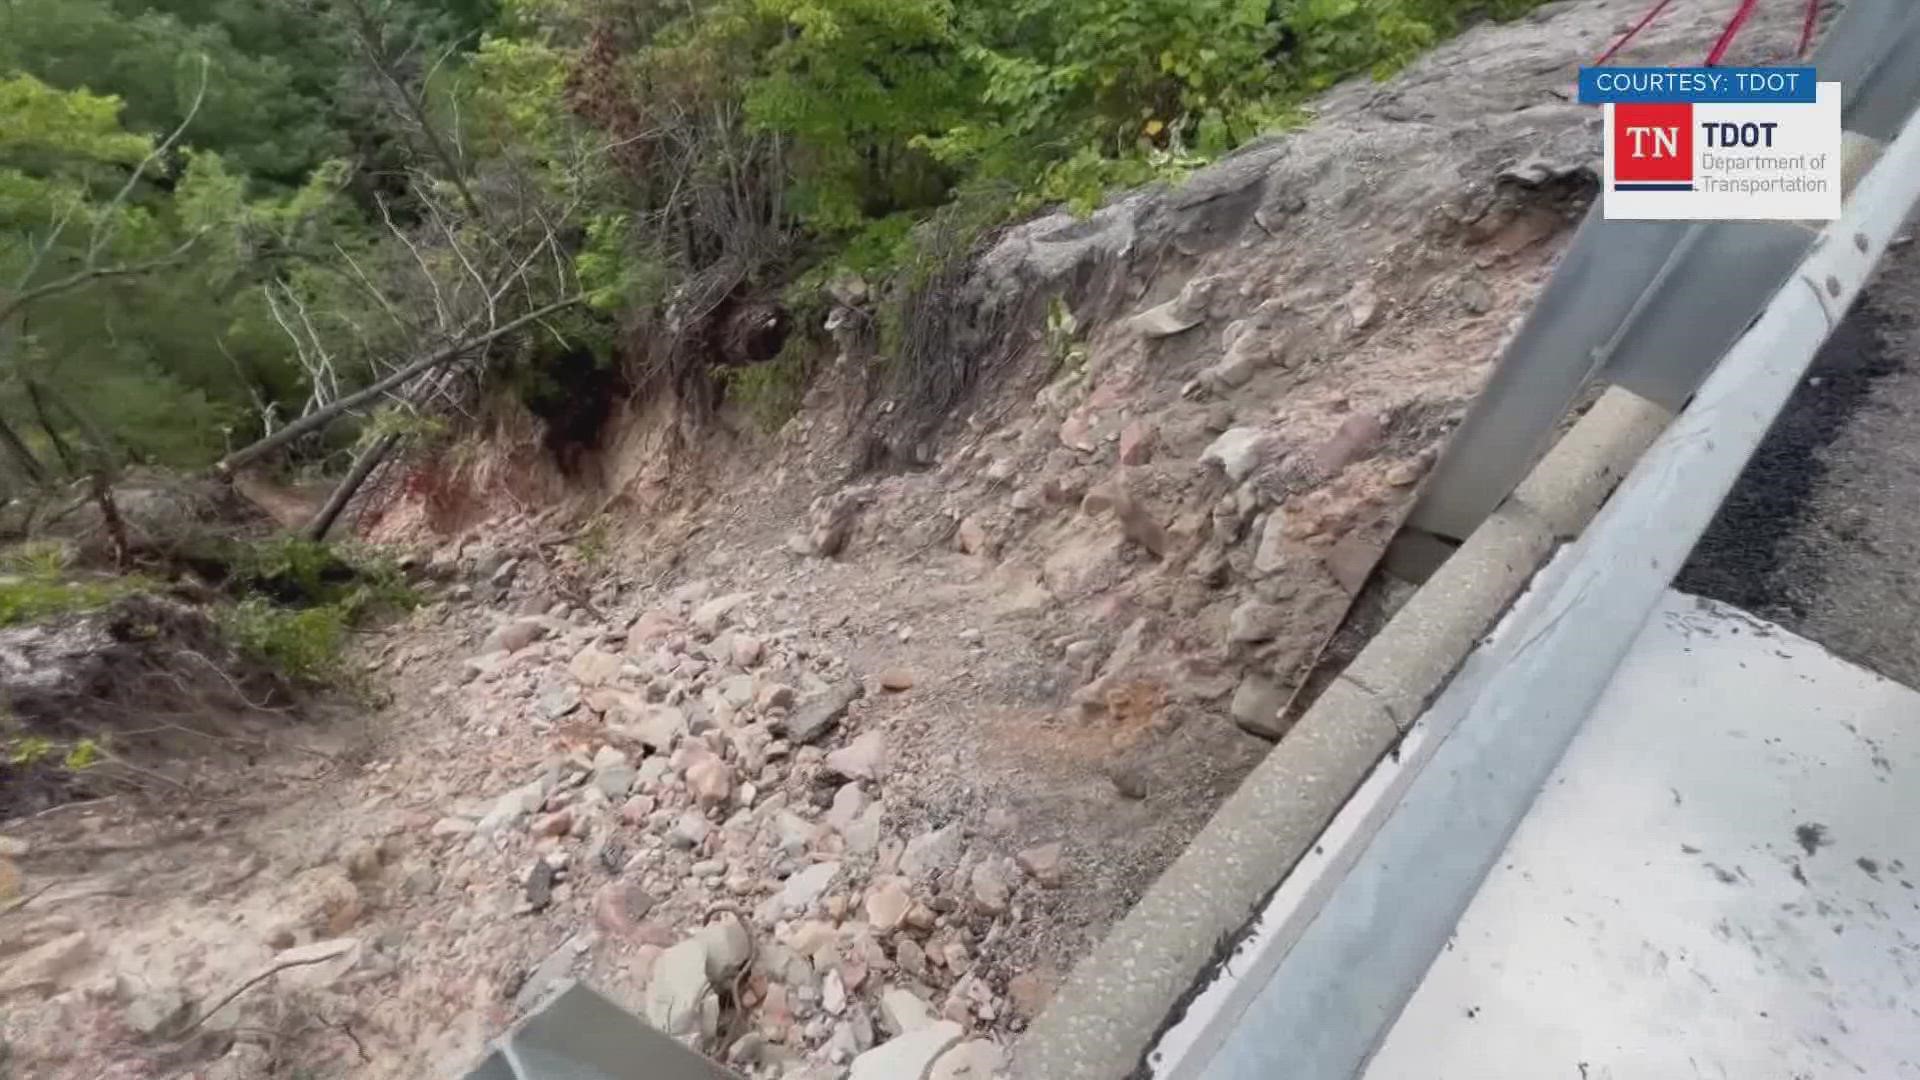 TDOT released video of the rockslide after crews closed a lane on Interstate 75 in Campbell County.